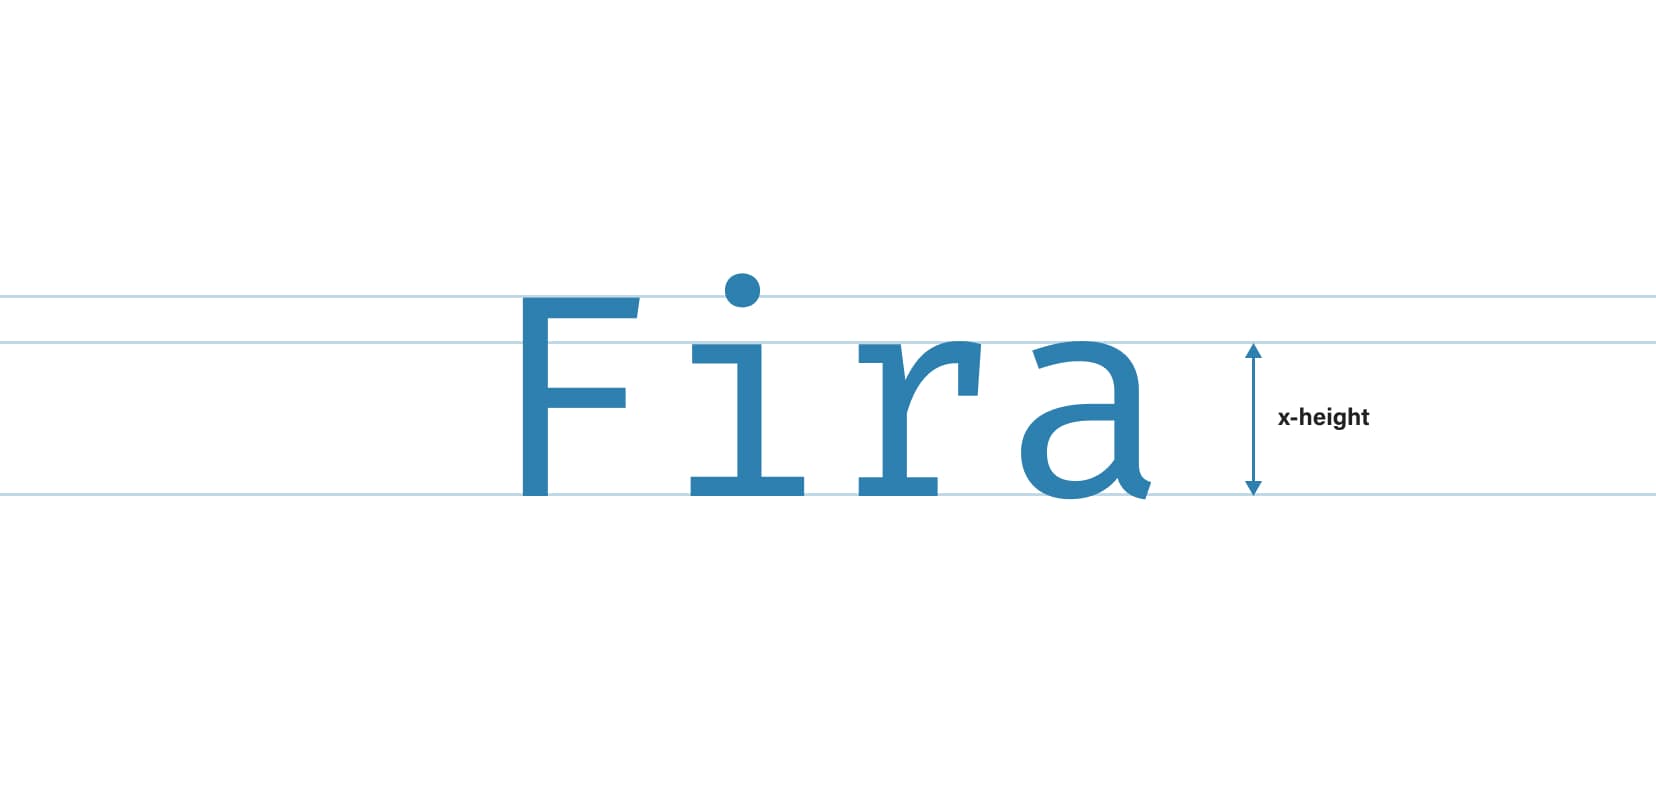 Fira Code’s x-height is quite standard, perfect for comparing with other fonts.